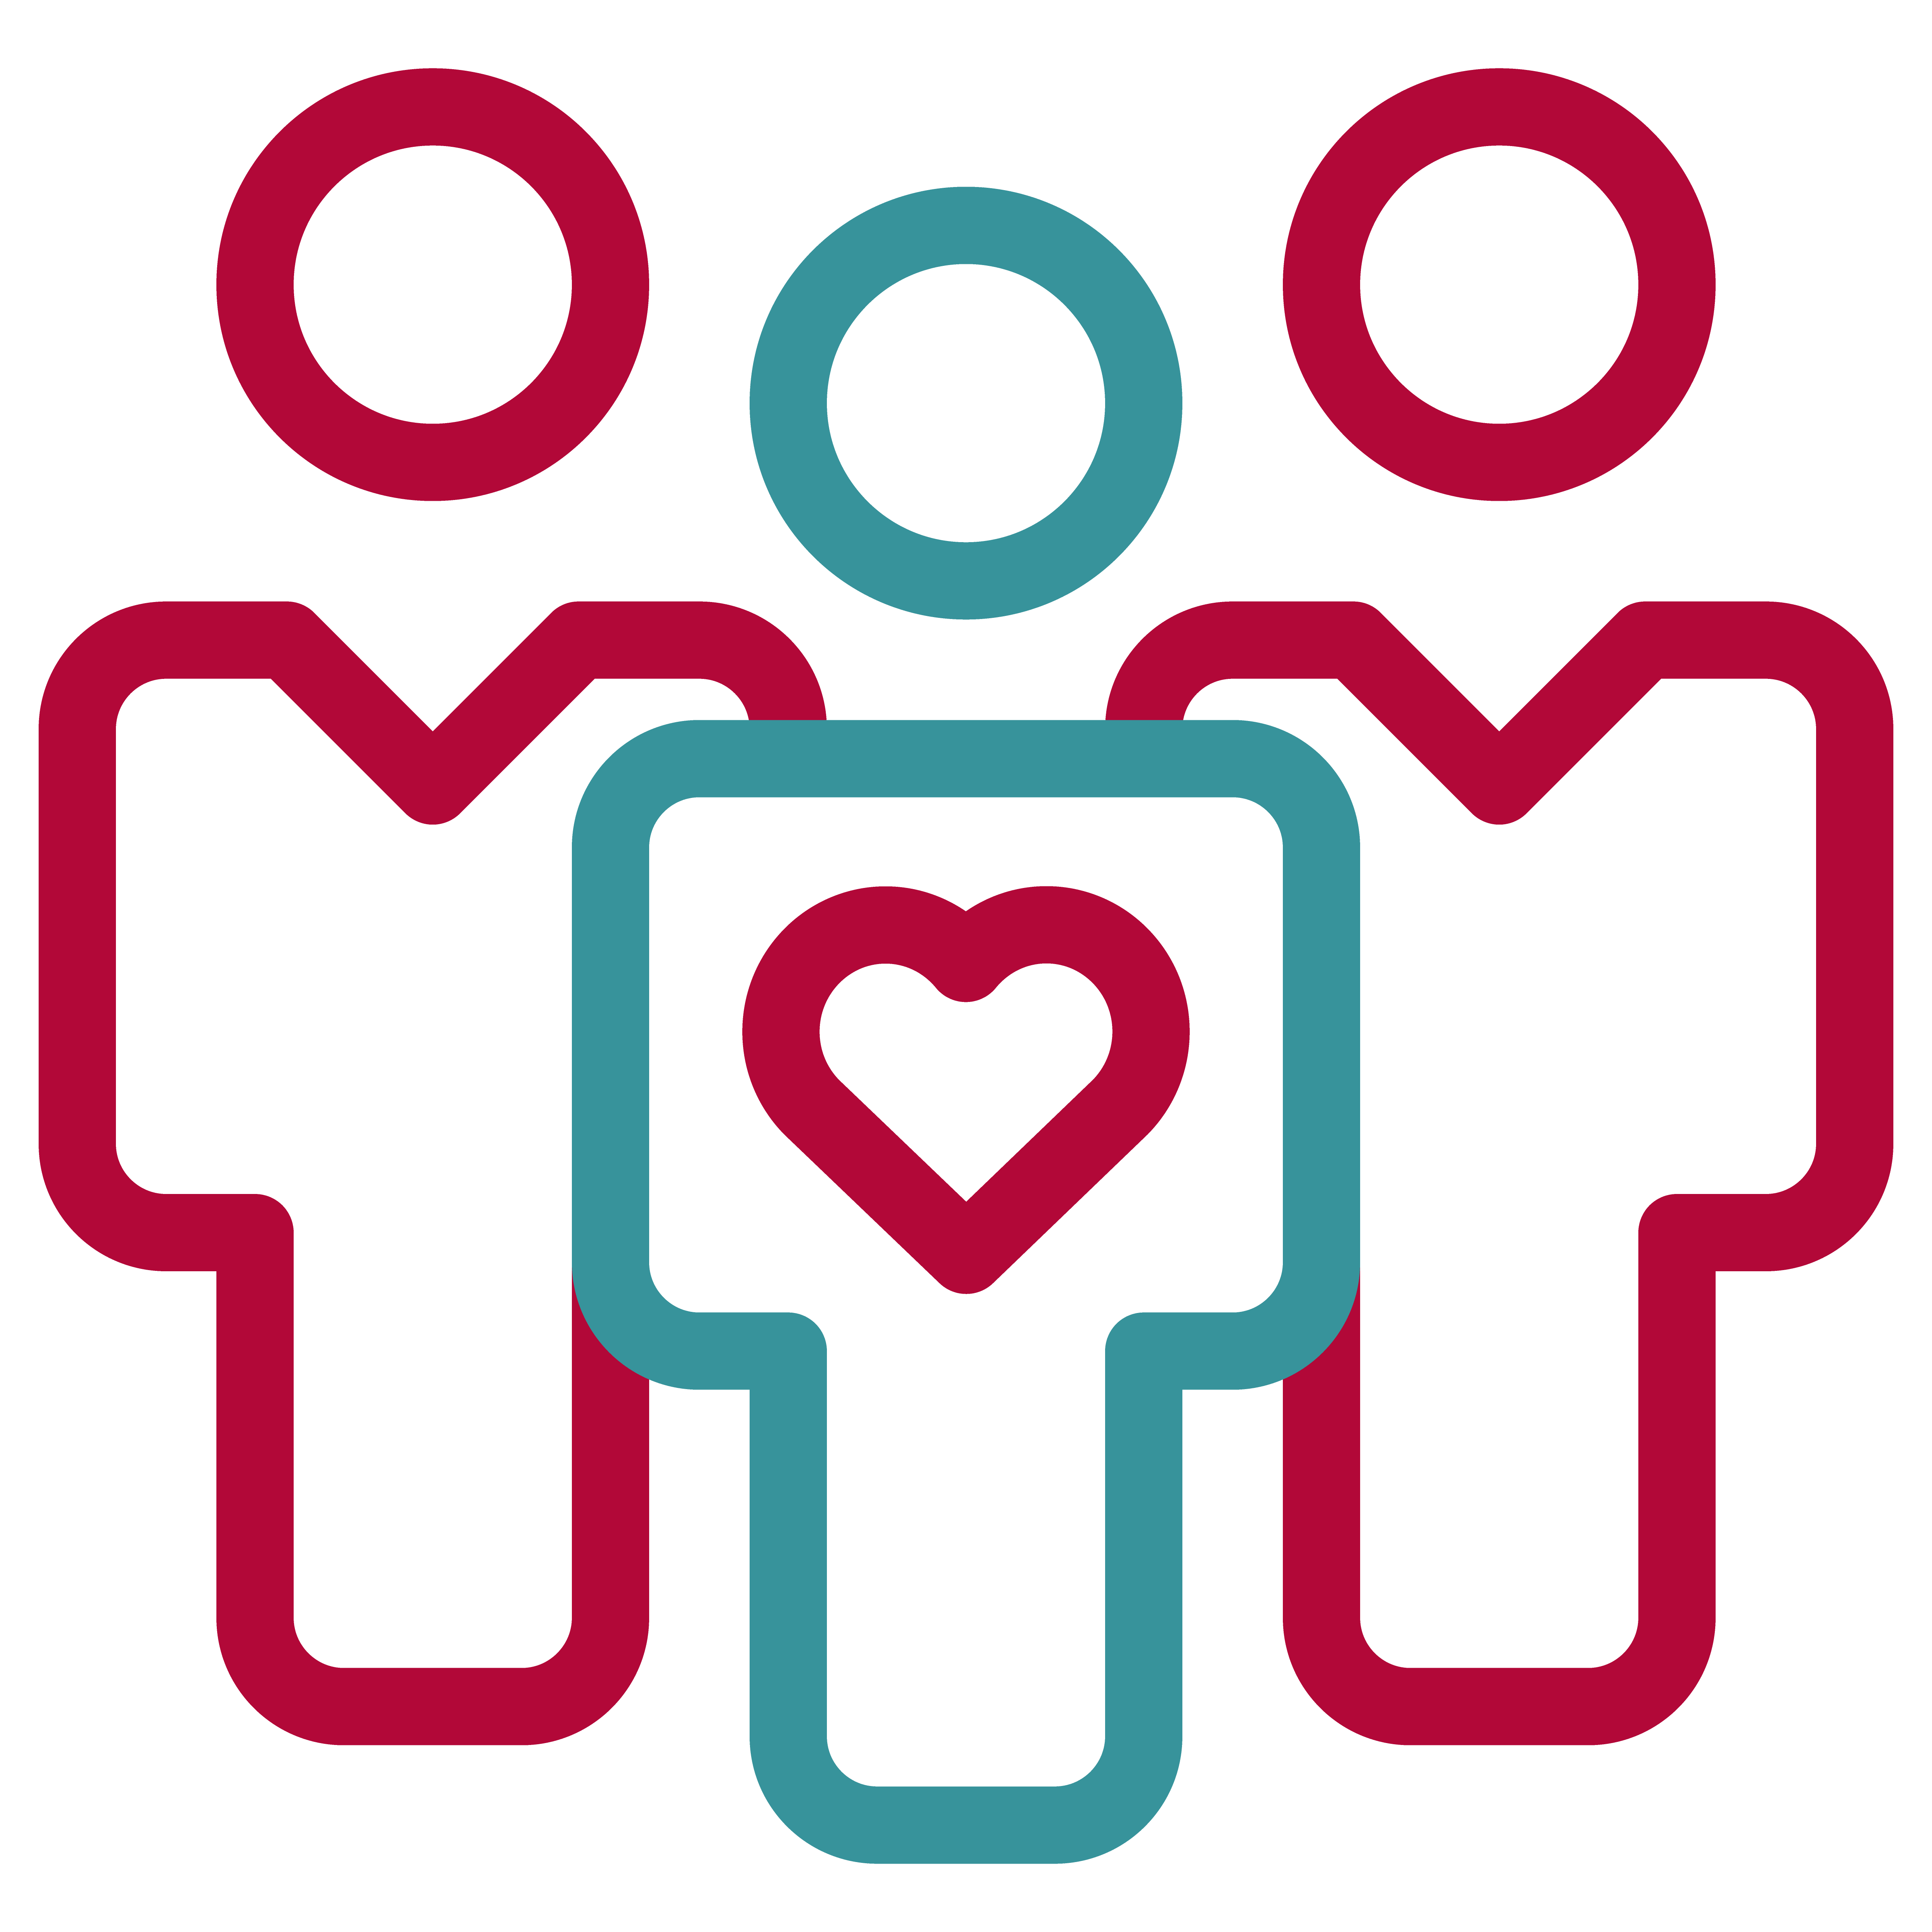 illustration of three people standing in a row, the person in the middle has a heart in the center